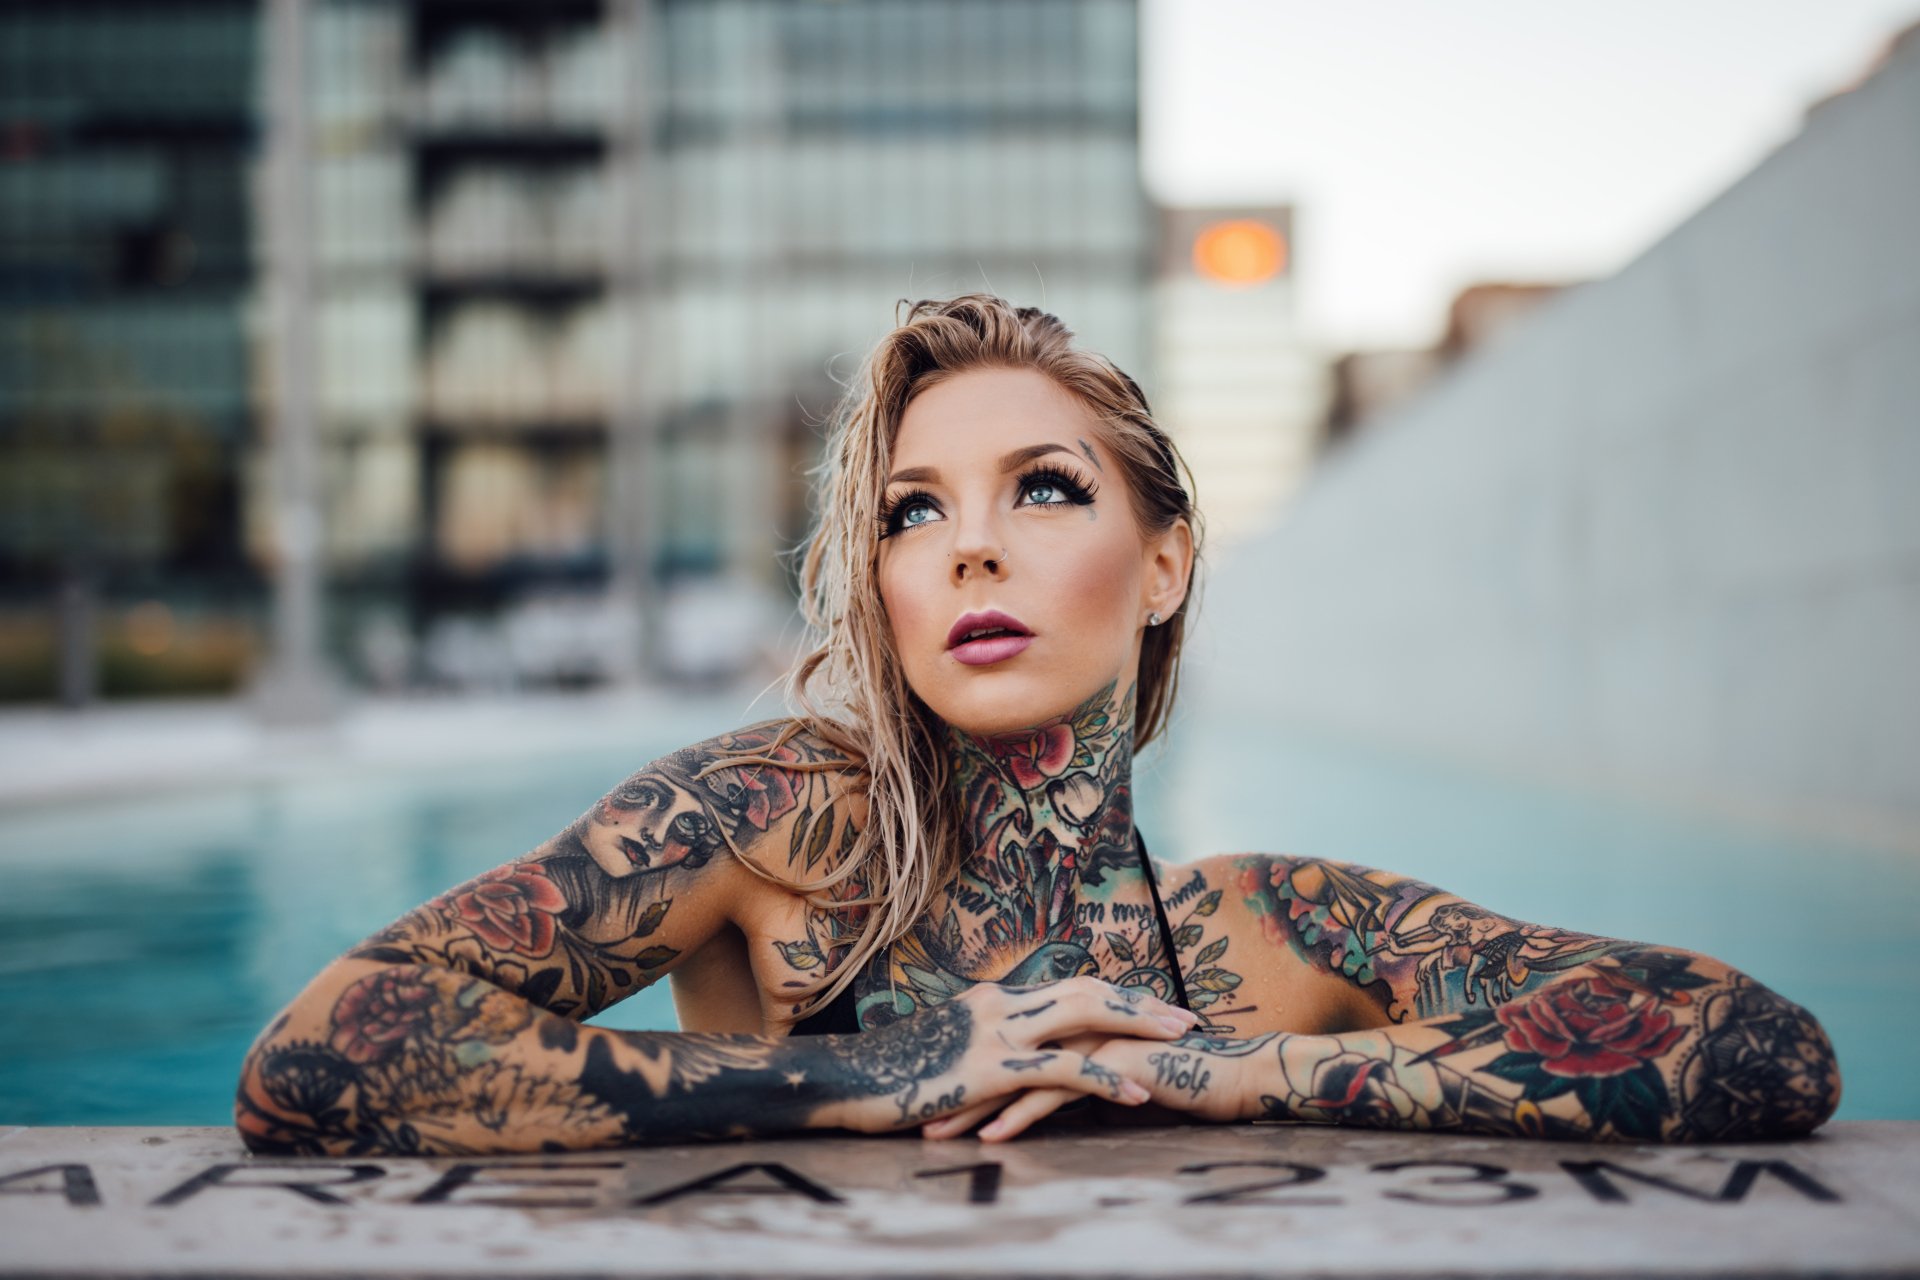 170+ Tattoo HD Wallpapers and Backgrounds